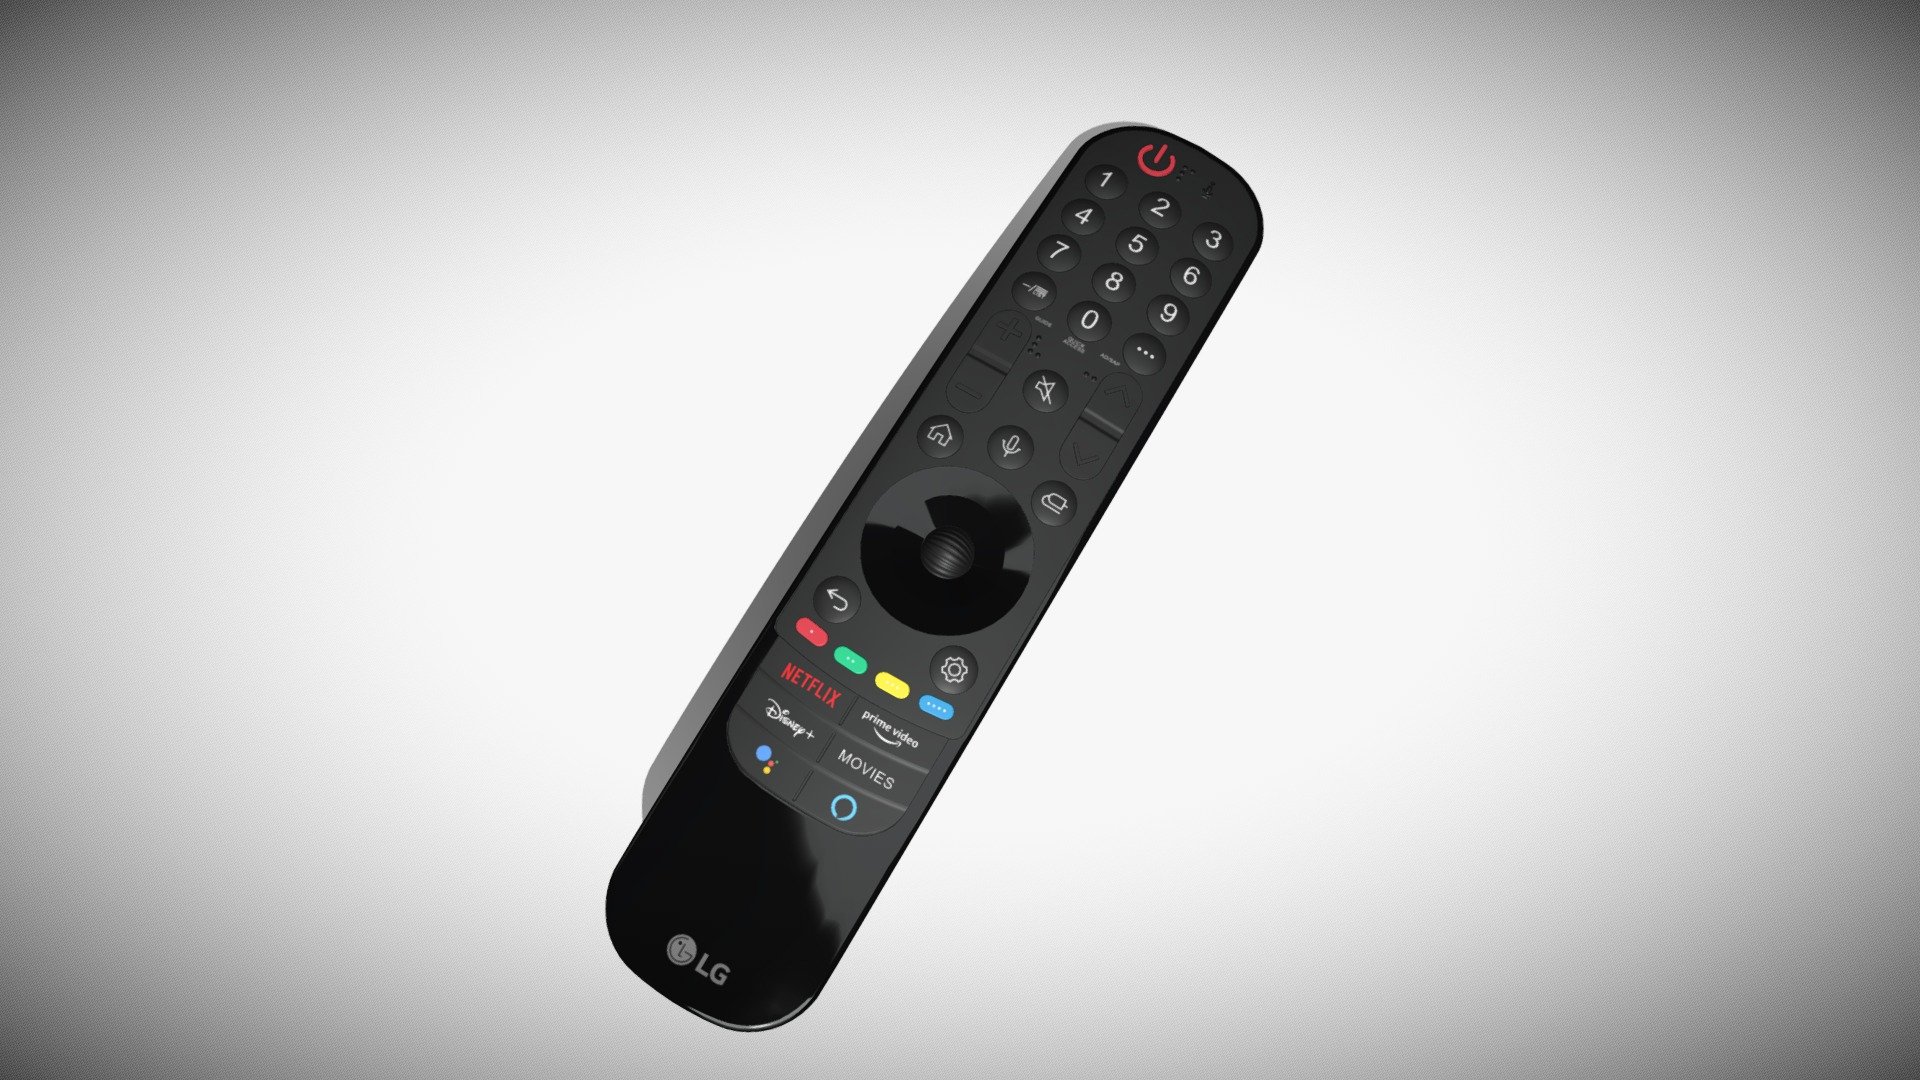 Detailed model of an LG Magic Remote, modeled in Cinema 4D.The model was created using approximate real world dimensions.

The model has 14,768 polys and 15,578 vertices.

An additional file has been provided containing the original Cinema 4D project files with both standard and v-ray materials, textures and other 3d export files such as 3ds, fbx and obj 3d model